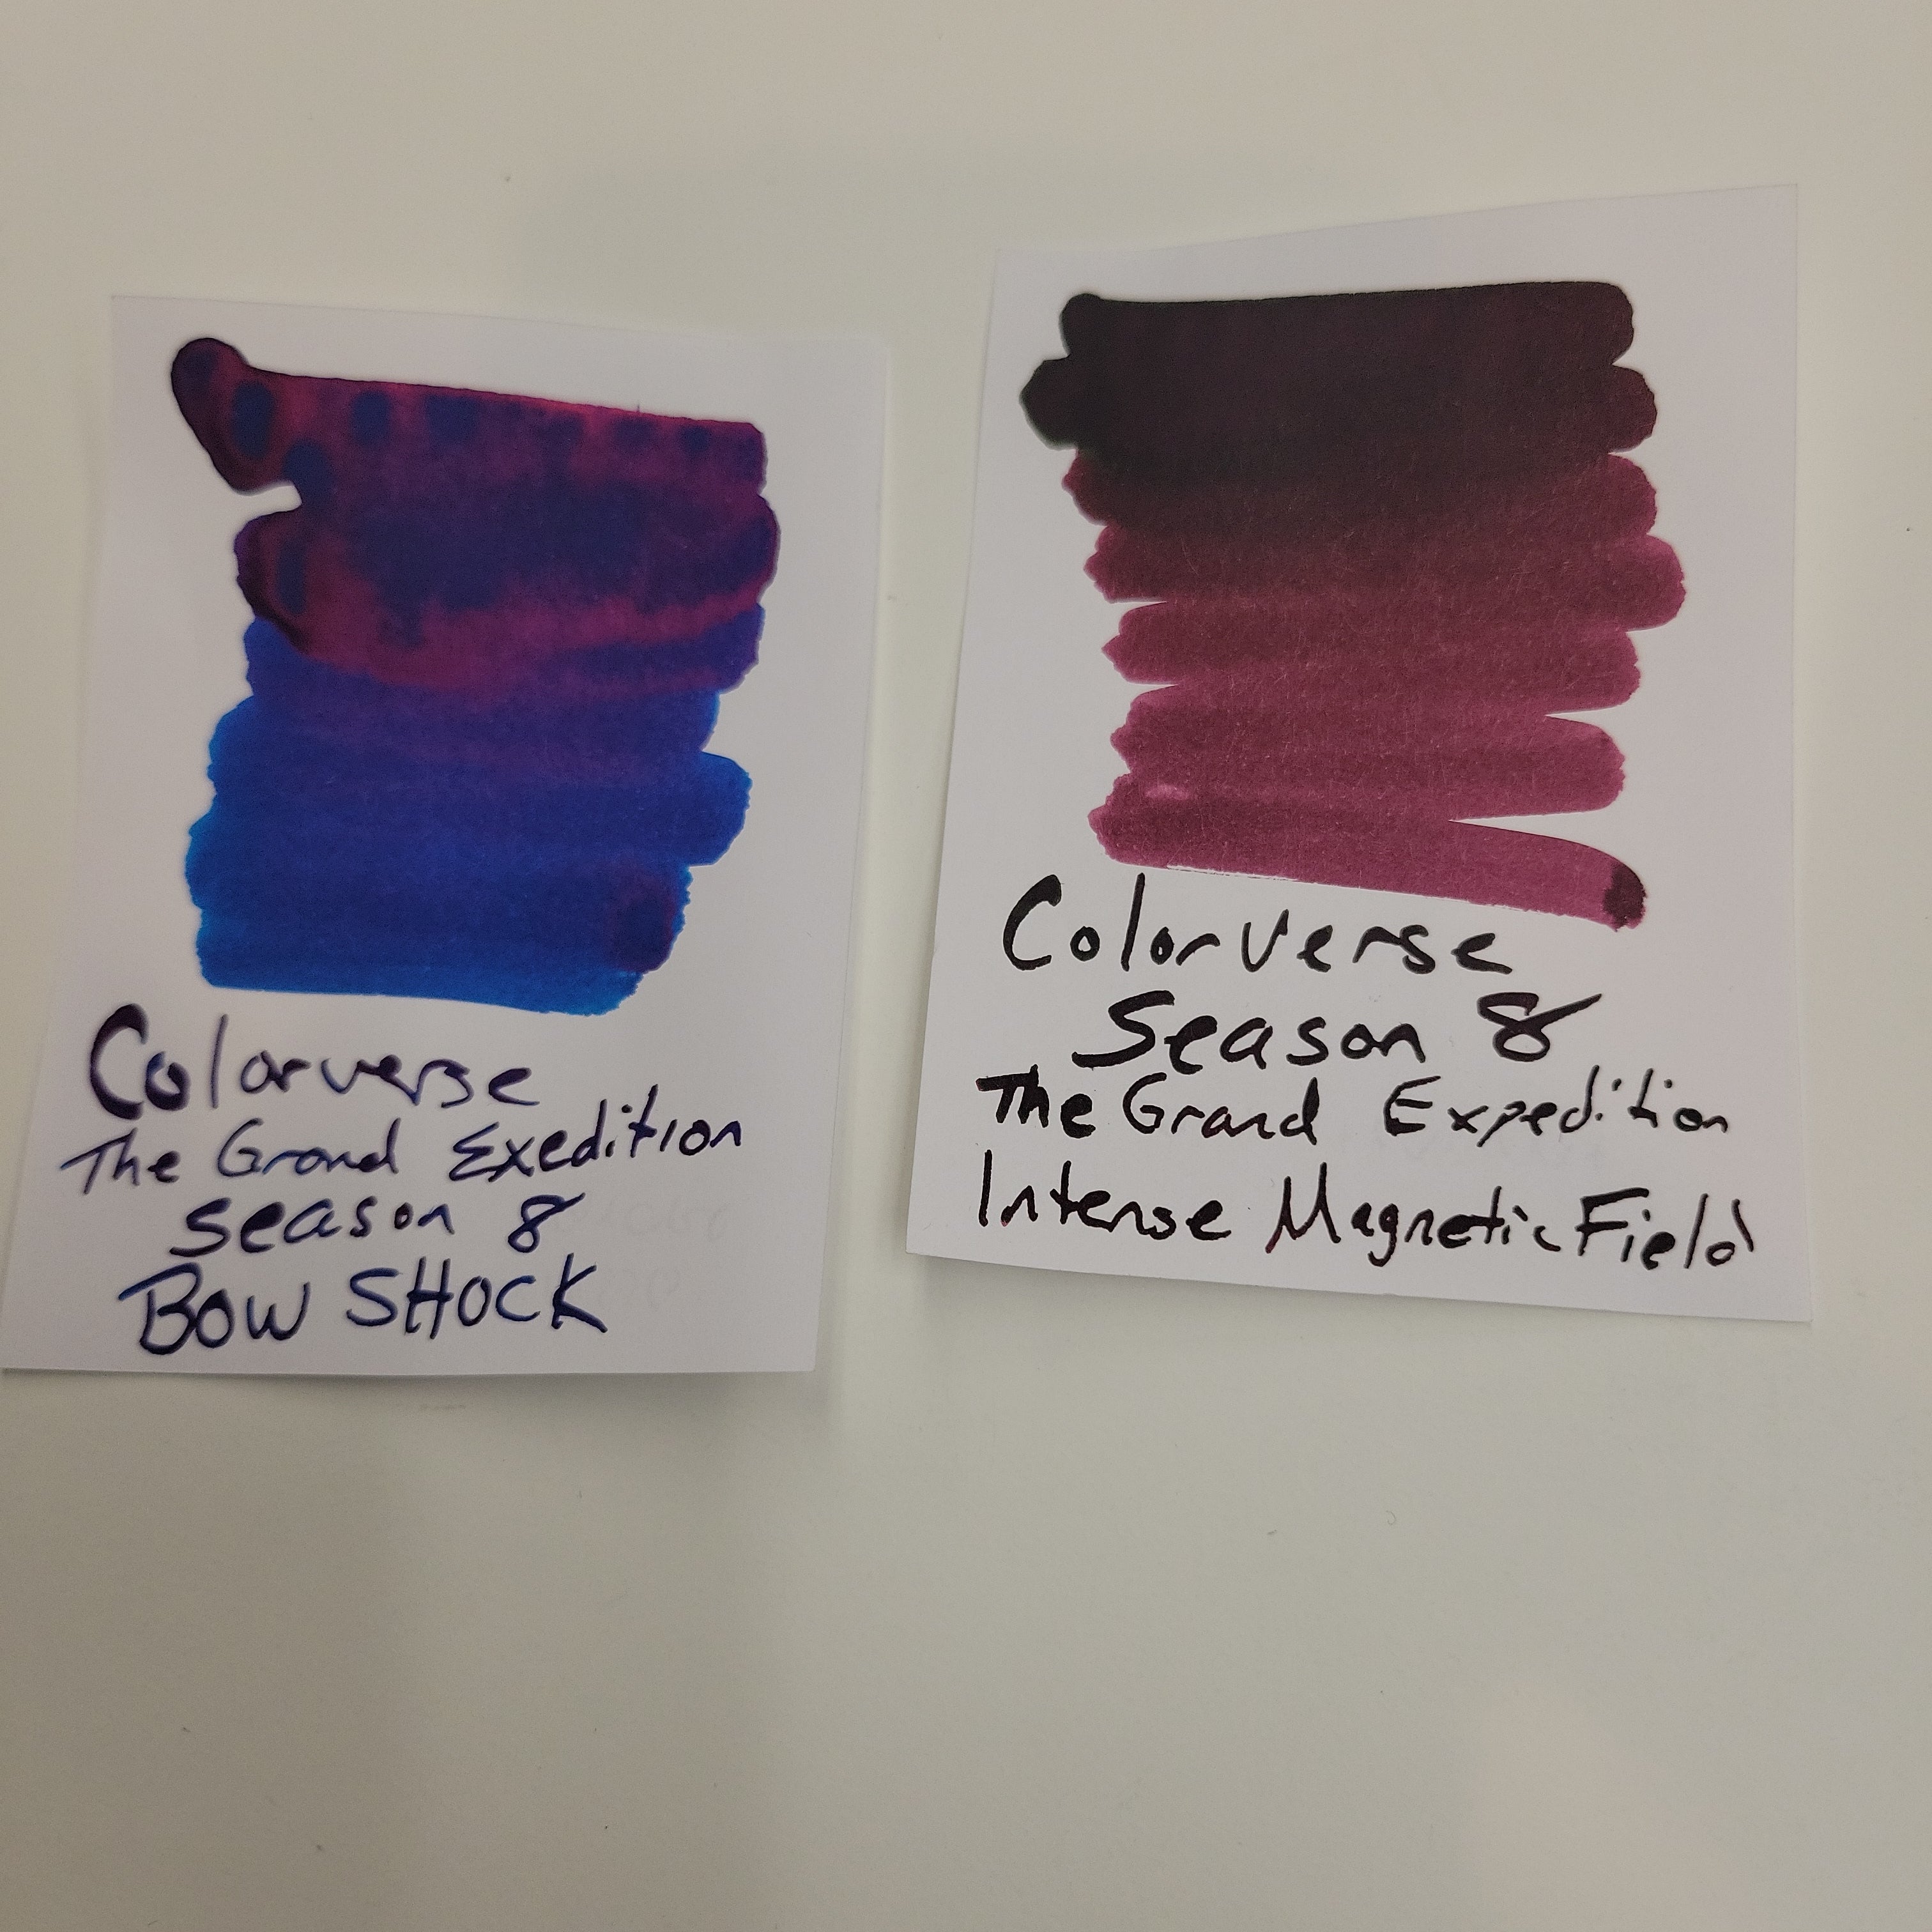 Colorverse Ink - Grand Expedition - Bow Shock & Intense Magnetic Field Colorverse